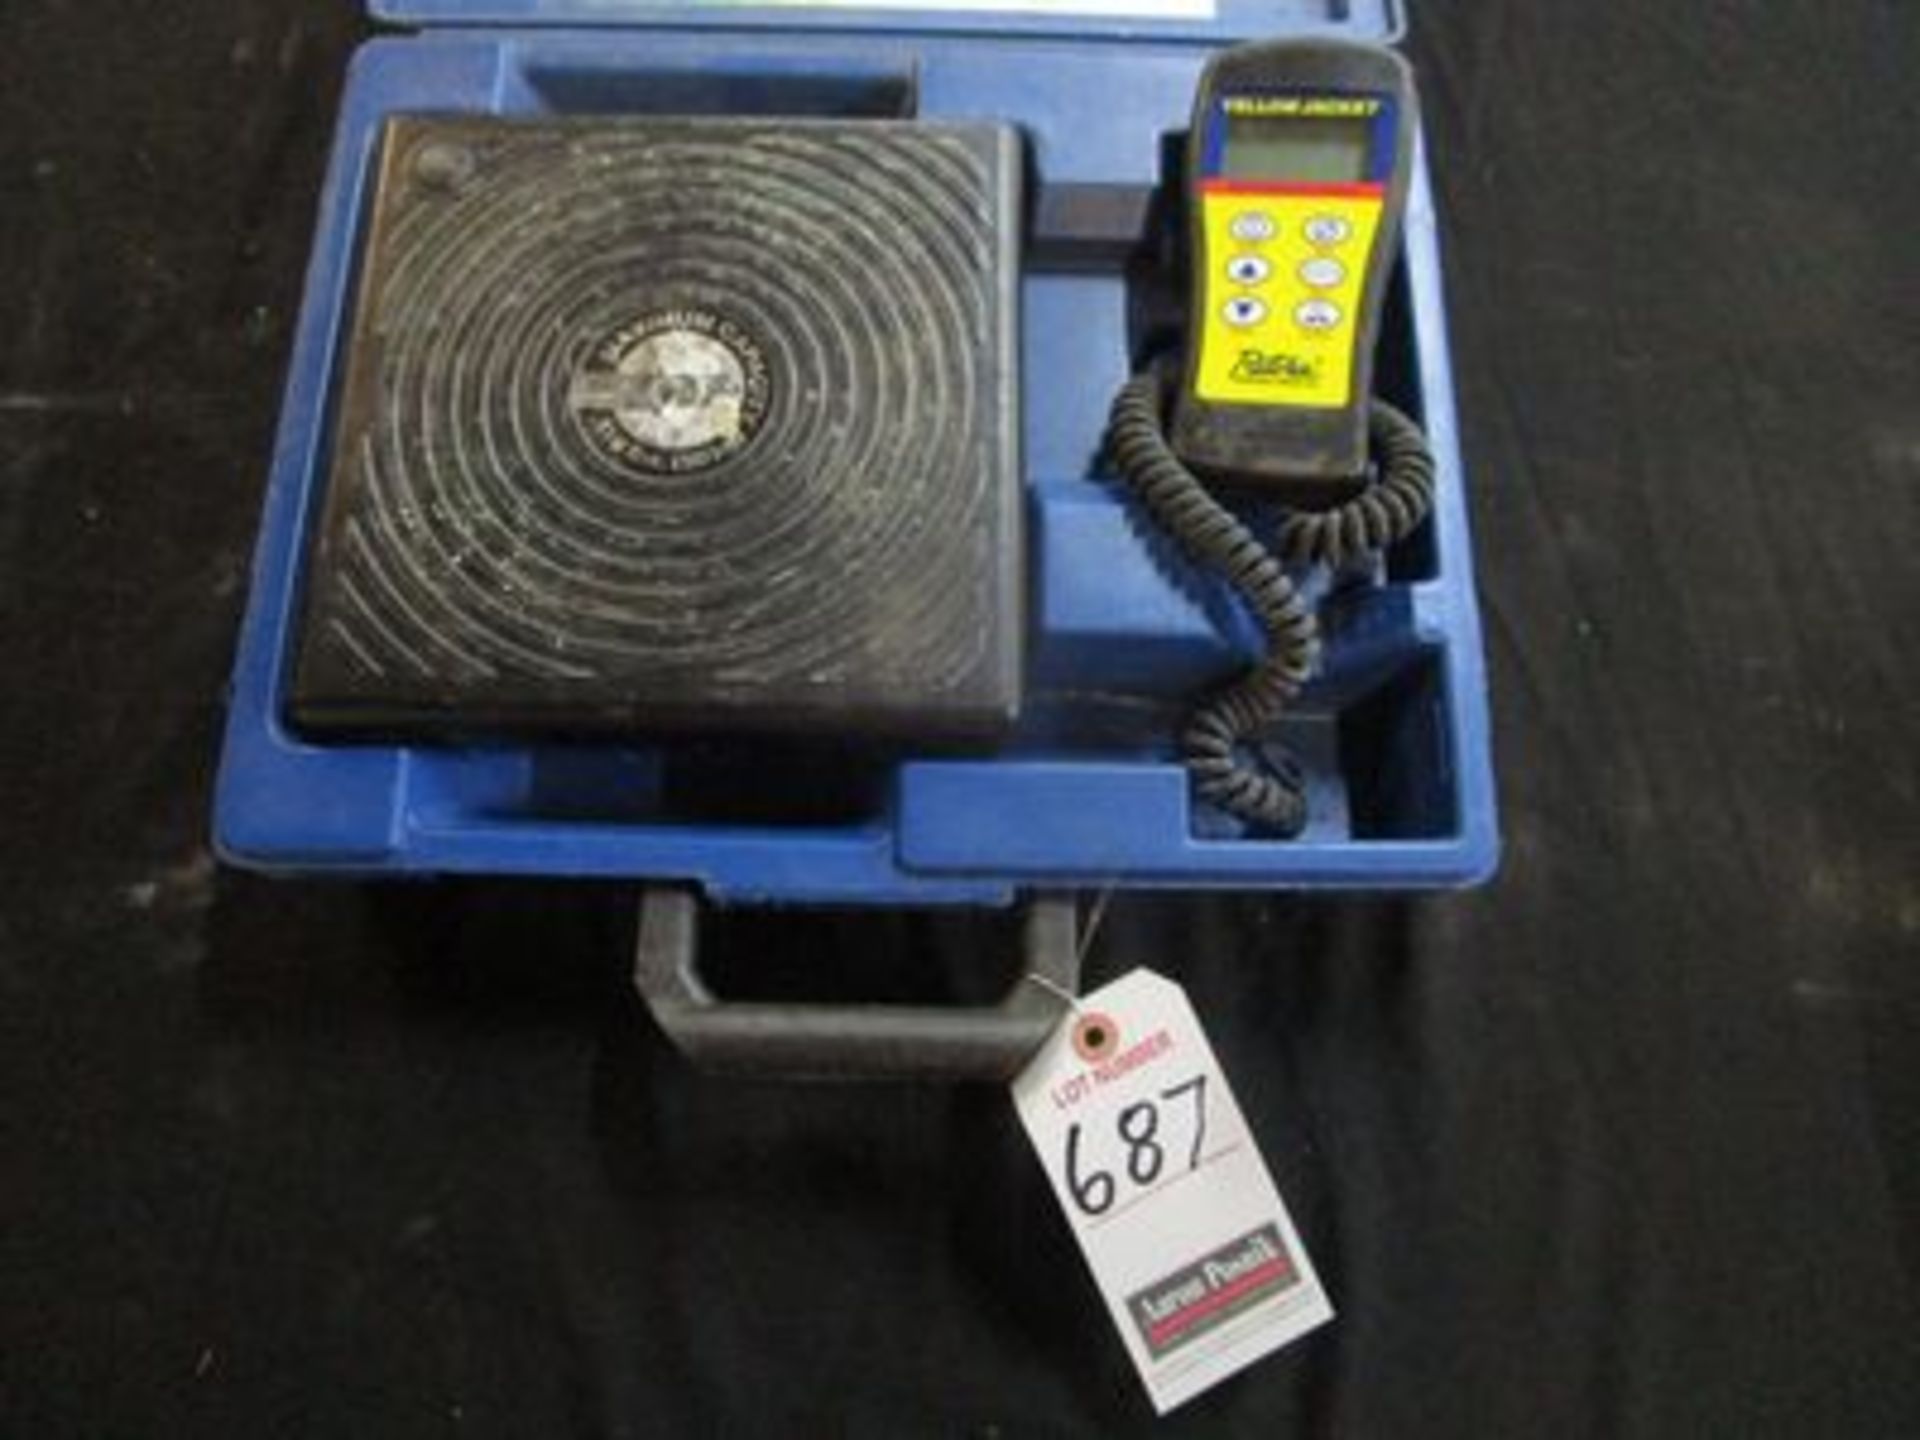 YELLOW JACKET DIG. ELECTRONIC CHARGING SCALE W/ CASE, M/N 68802